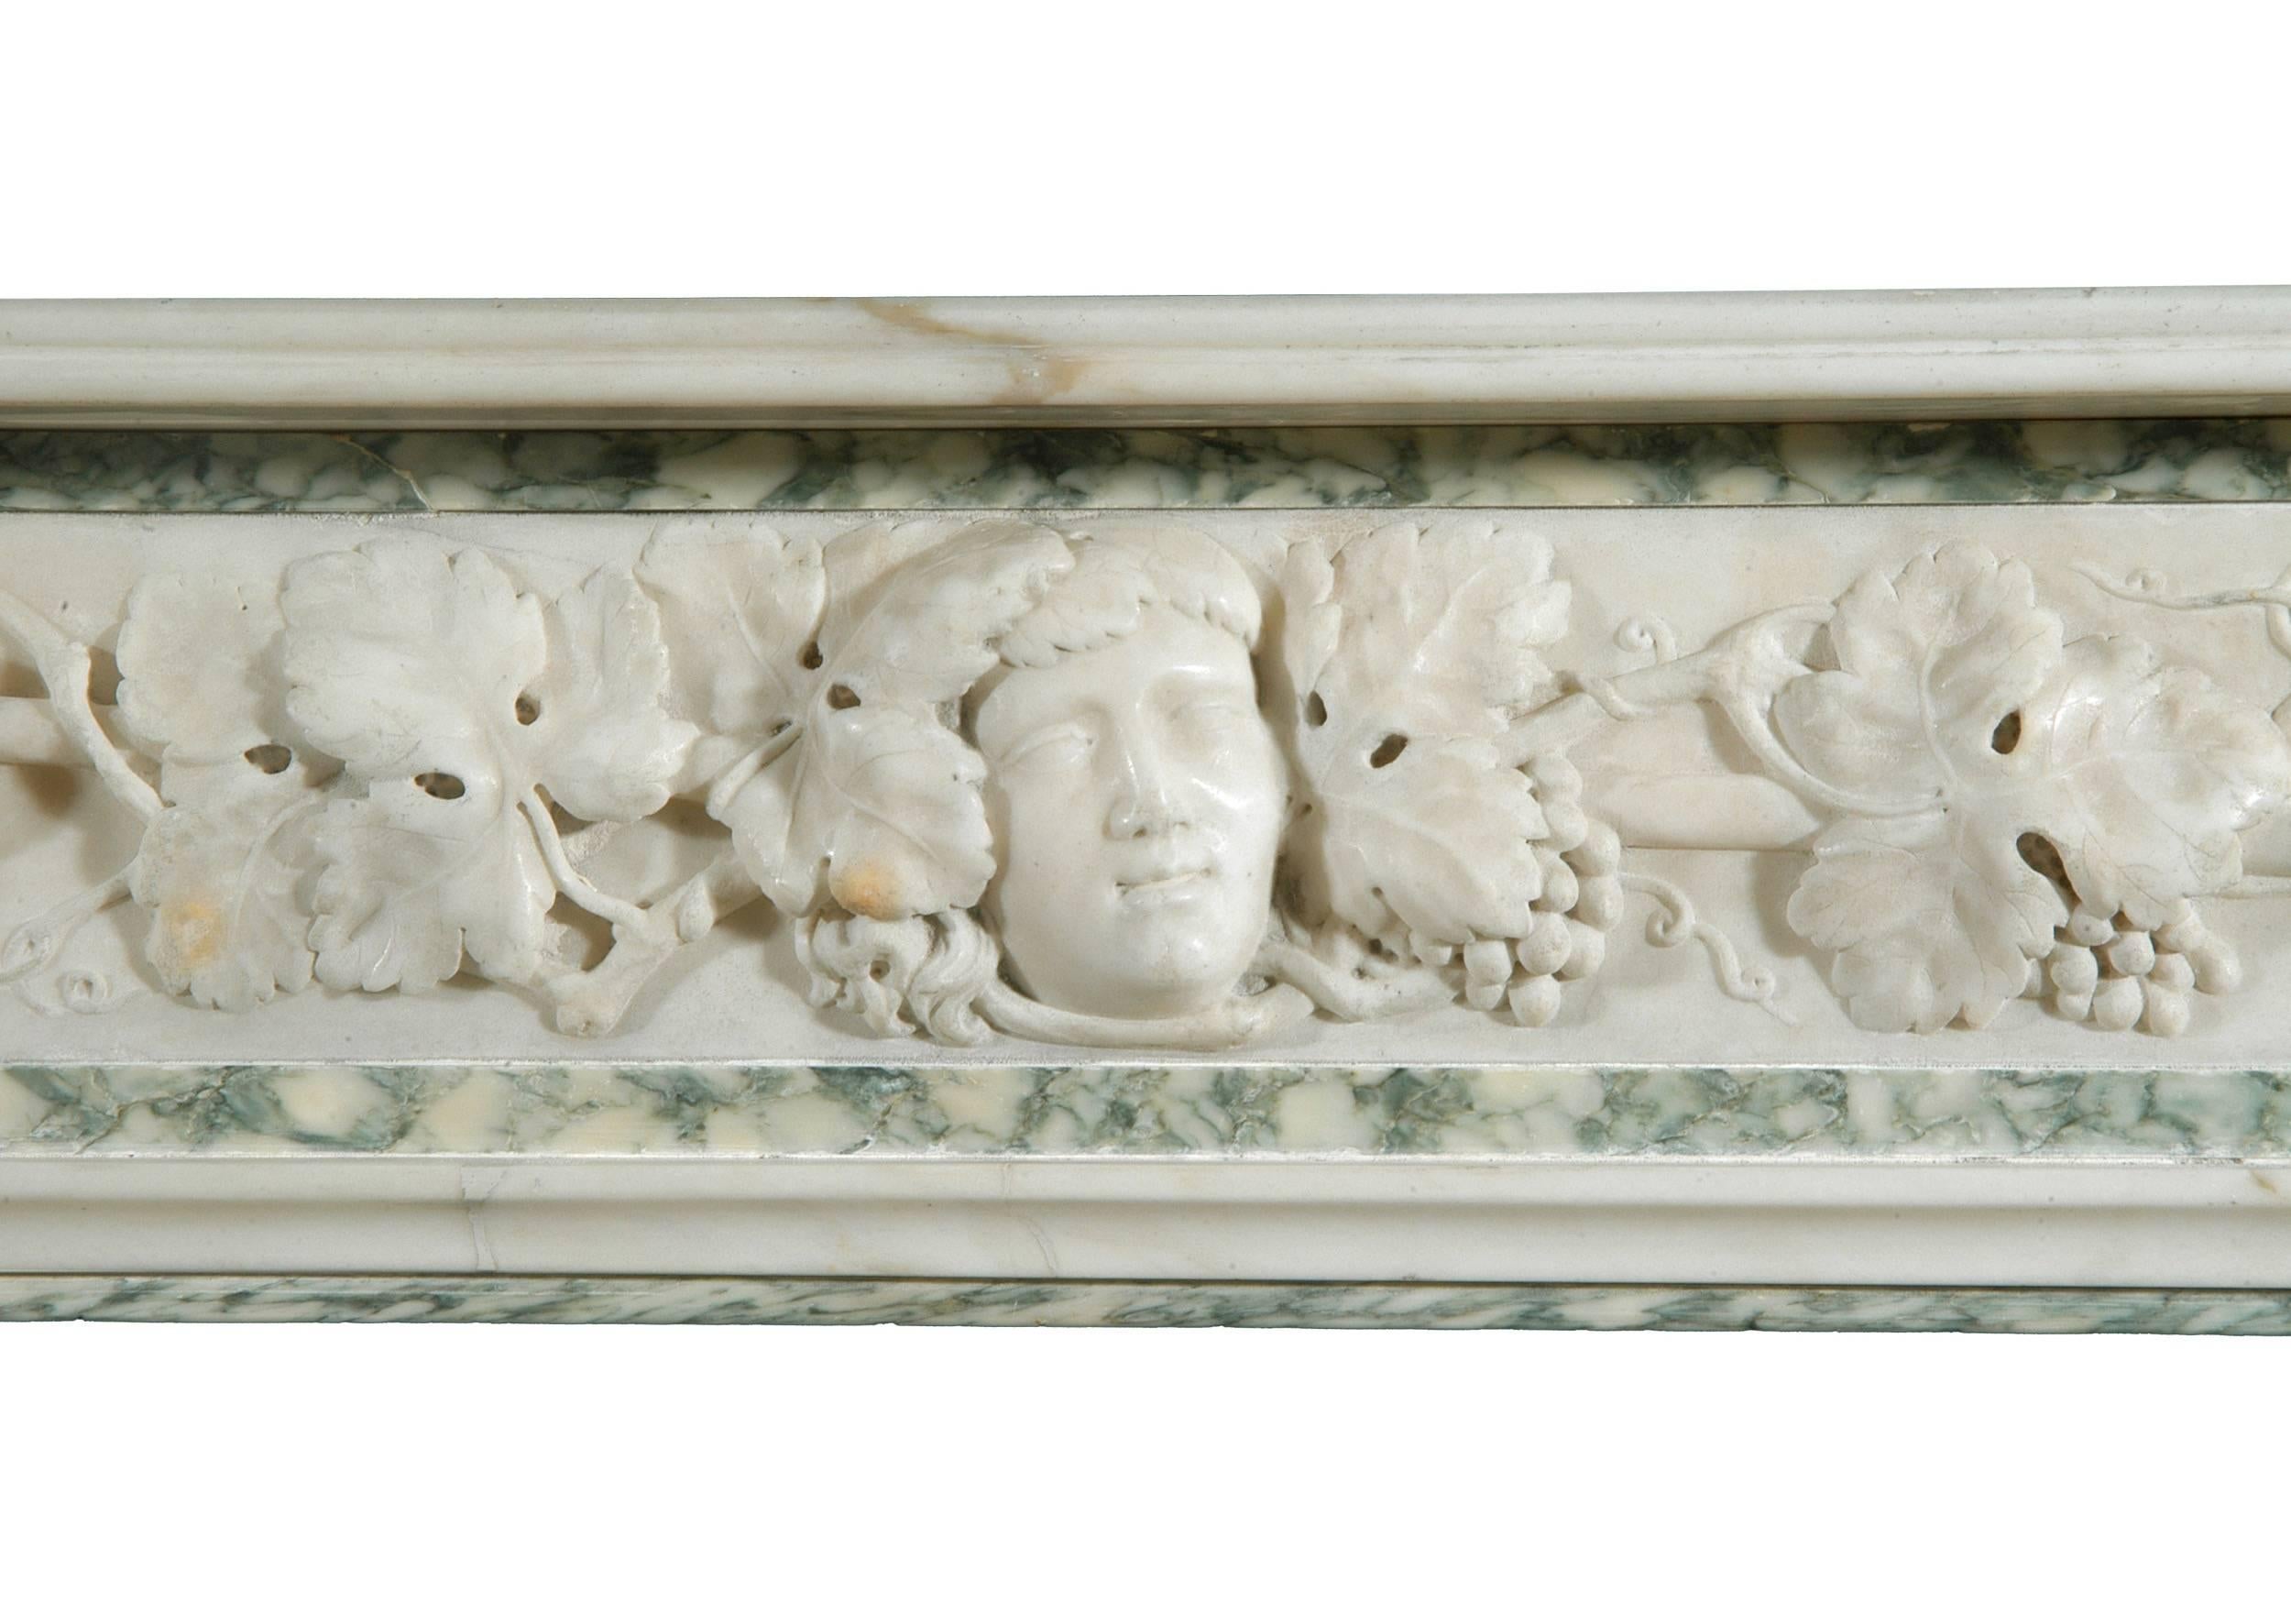 A 19th century (circa 1850) English statuary and Vert d'Estours marble fireplace, with heavily carved frieze of intertwined vine leaves around carved staff, theatrical mask to centre. The jambs carved with leaves and bellflowers. Reeded moulded